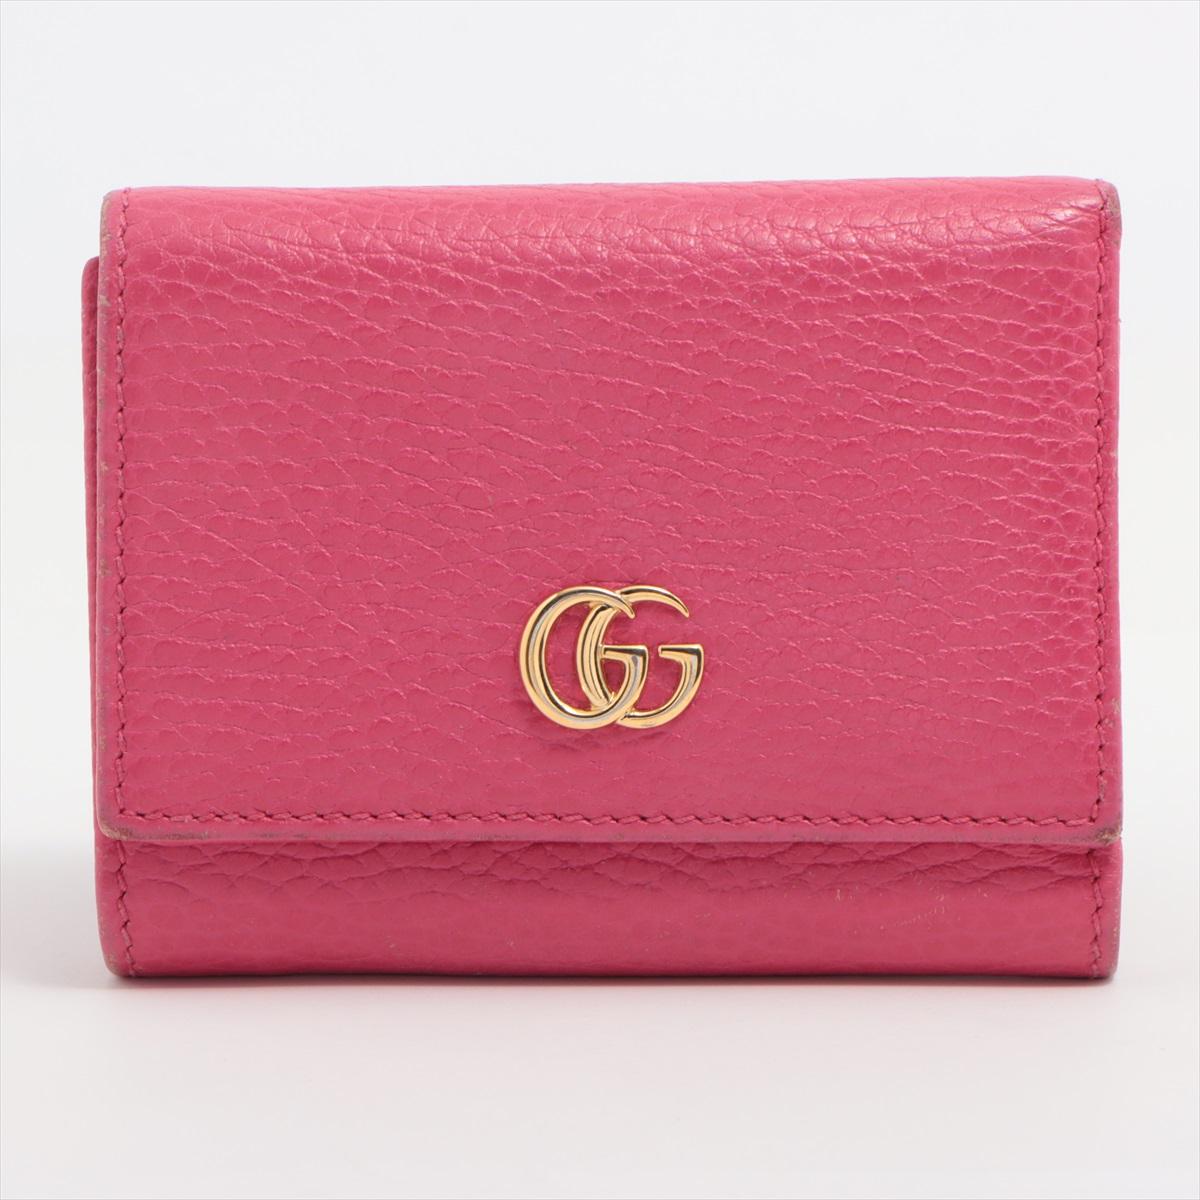 The Gucci GG Marmont Leather Compact Wallet in Pink a stylish and compact accessory that seamlessly fuses luxury with modern design. Meticulously crafted from smooth leather, the wallet features the iconic GG Marmont chevron pattern, showcasing